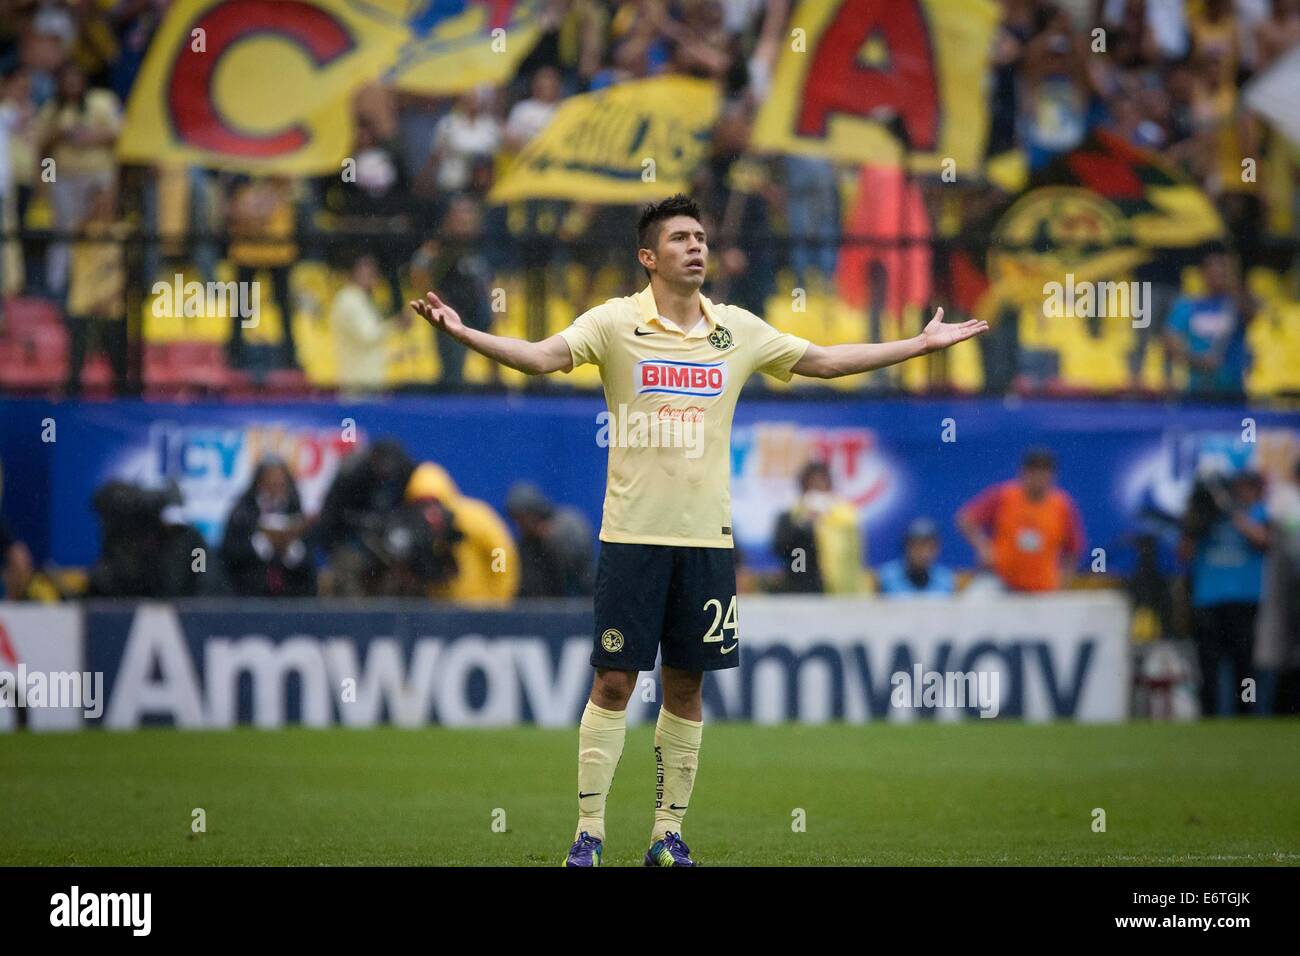 Mexico City, Mexico. 30th Aug, 2014. Oribe Peralta of America reacts after the match of the MX League Opening Tournament 2014, against UNAM's Pumas, held at Azteca Stadium, in Mexico City, capital of Mexico, on Aug. 30, 2014. Credit:  Pedro Mera/Xinhua/Alamy Live News Stock Photo